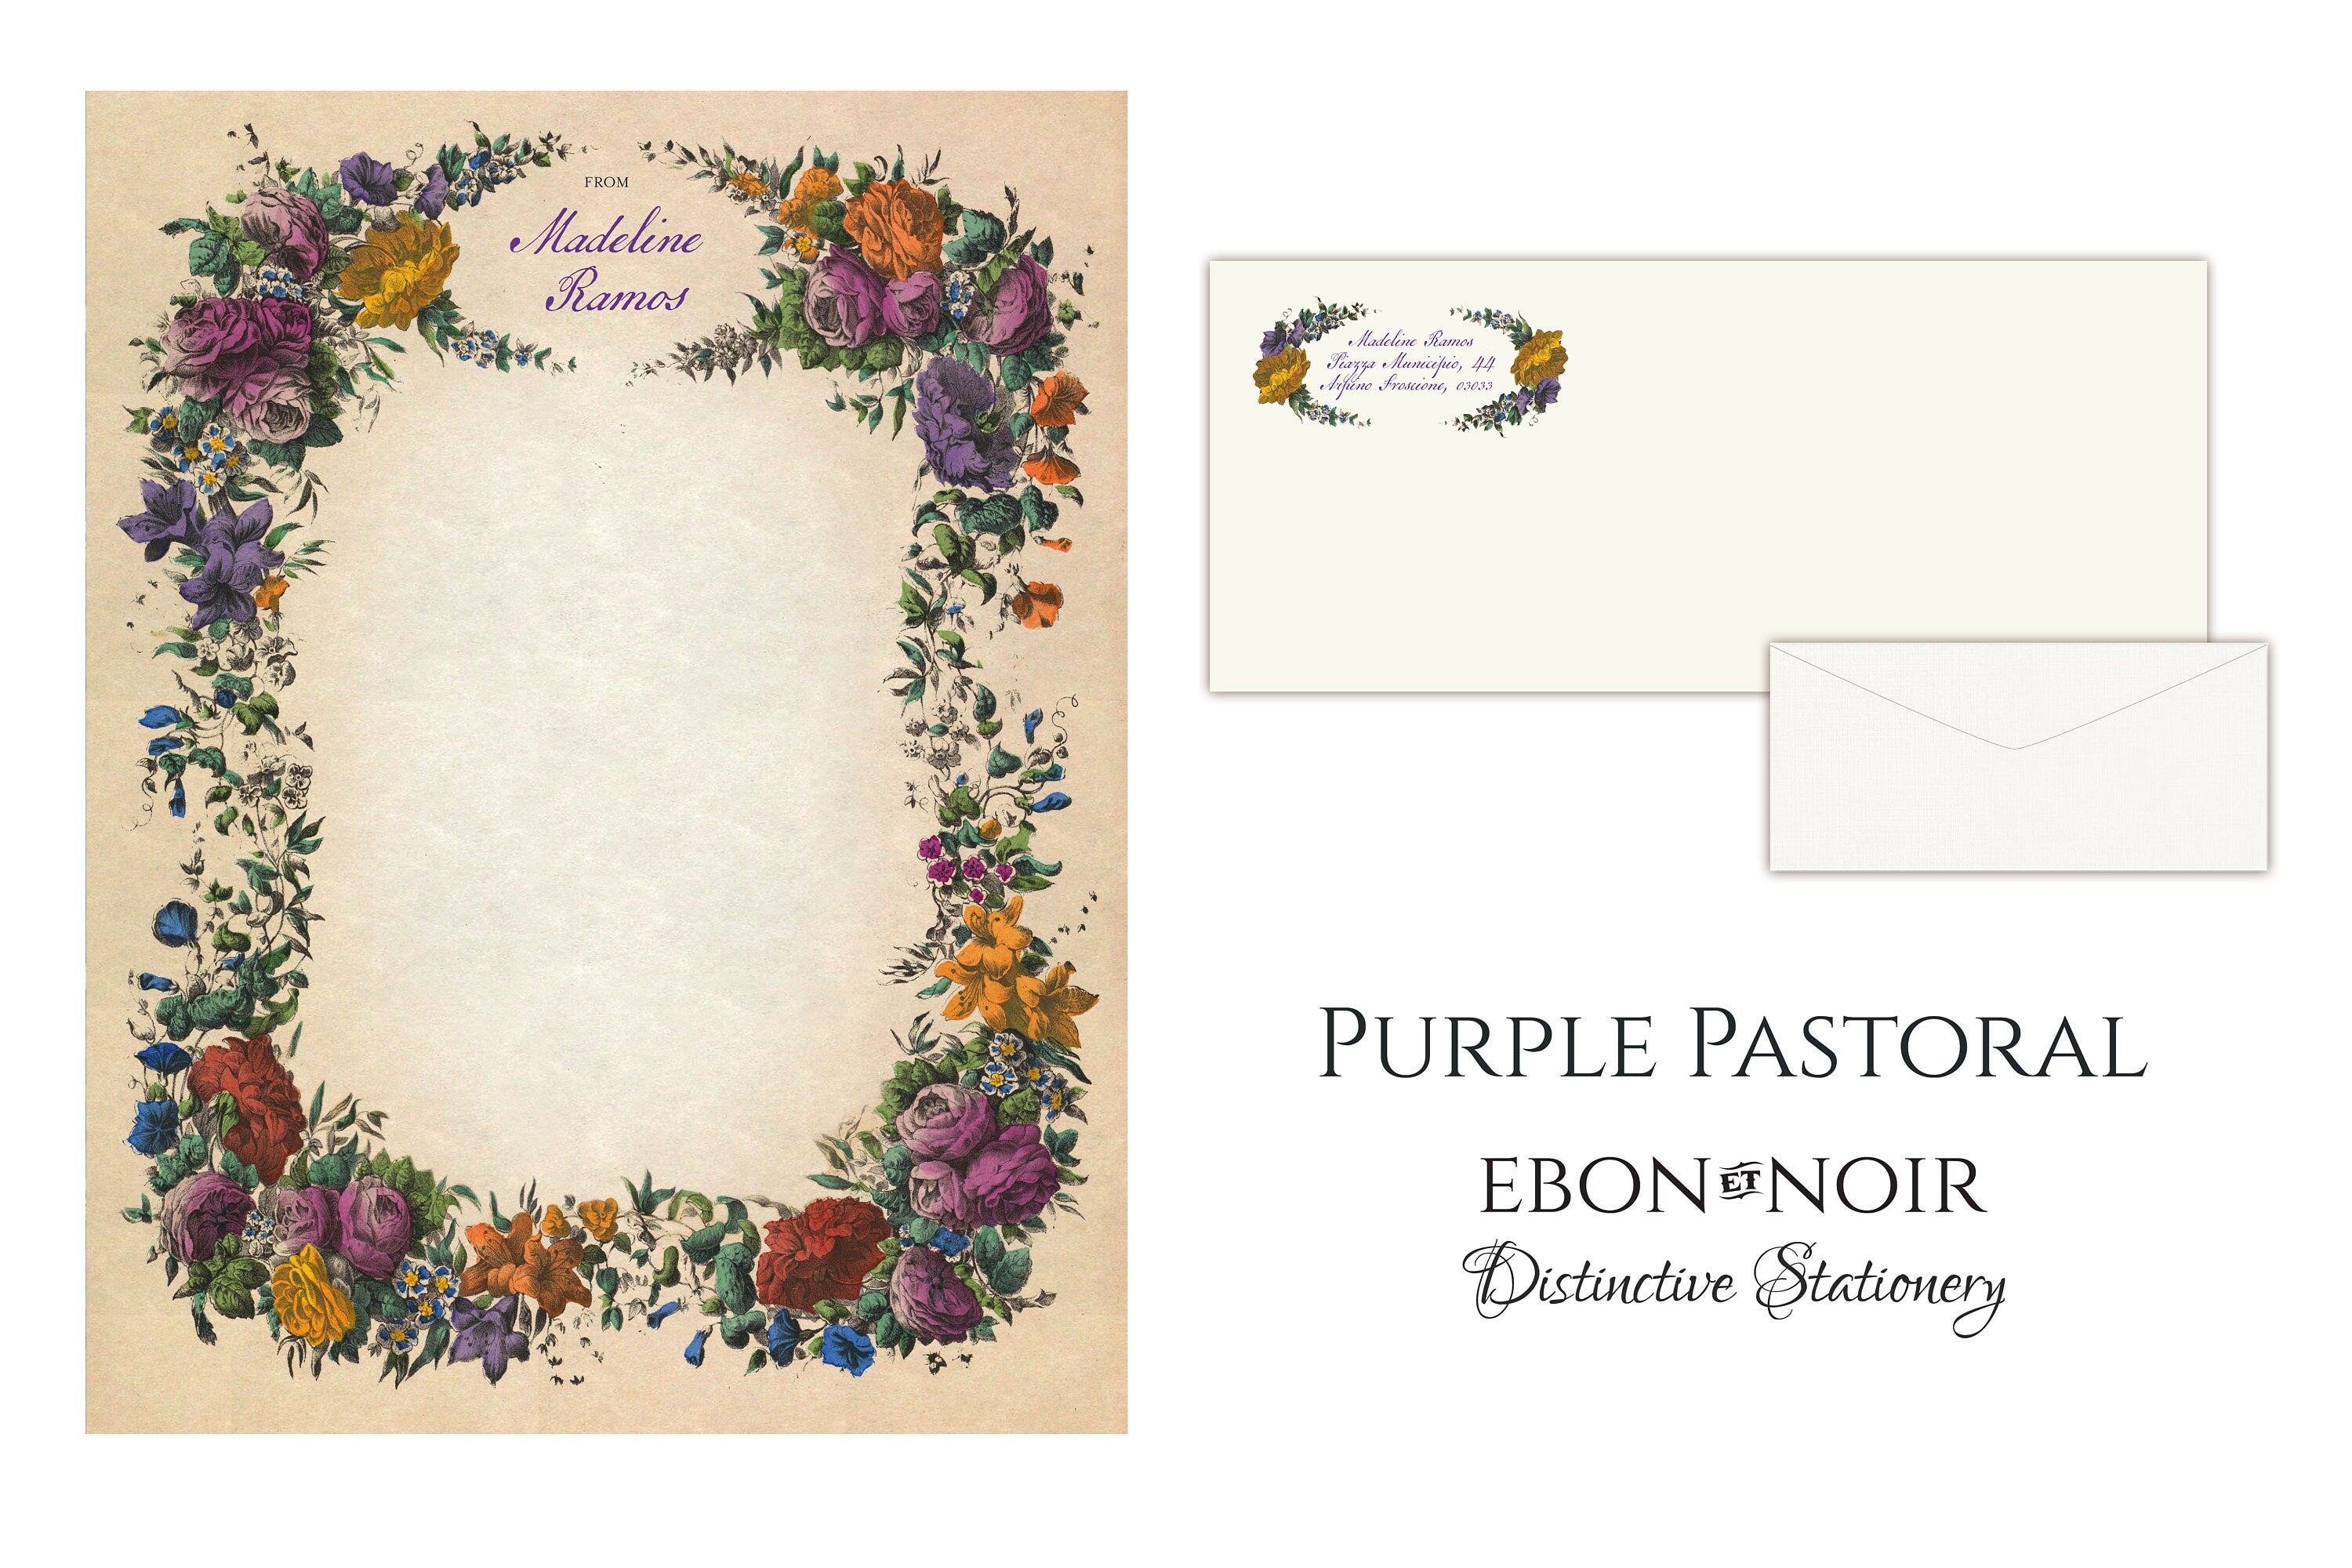 Purple Pastoral, Luxurious Handcrafted Stationery Set for Letter Writing, Personalized, 12 Sheets/10 Envelopes